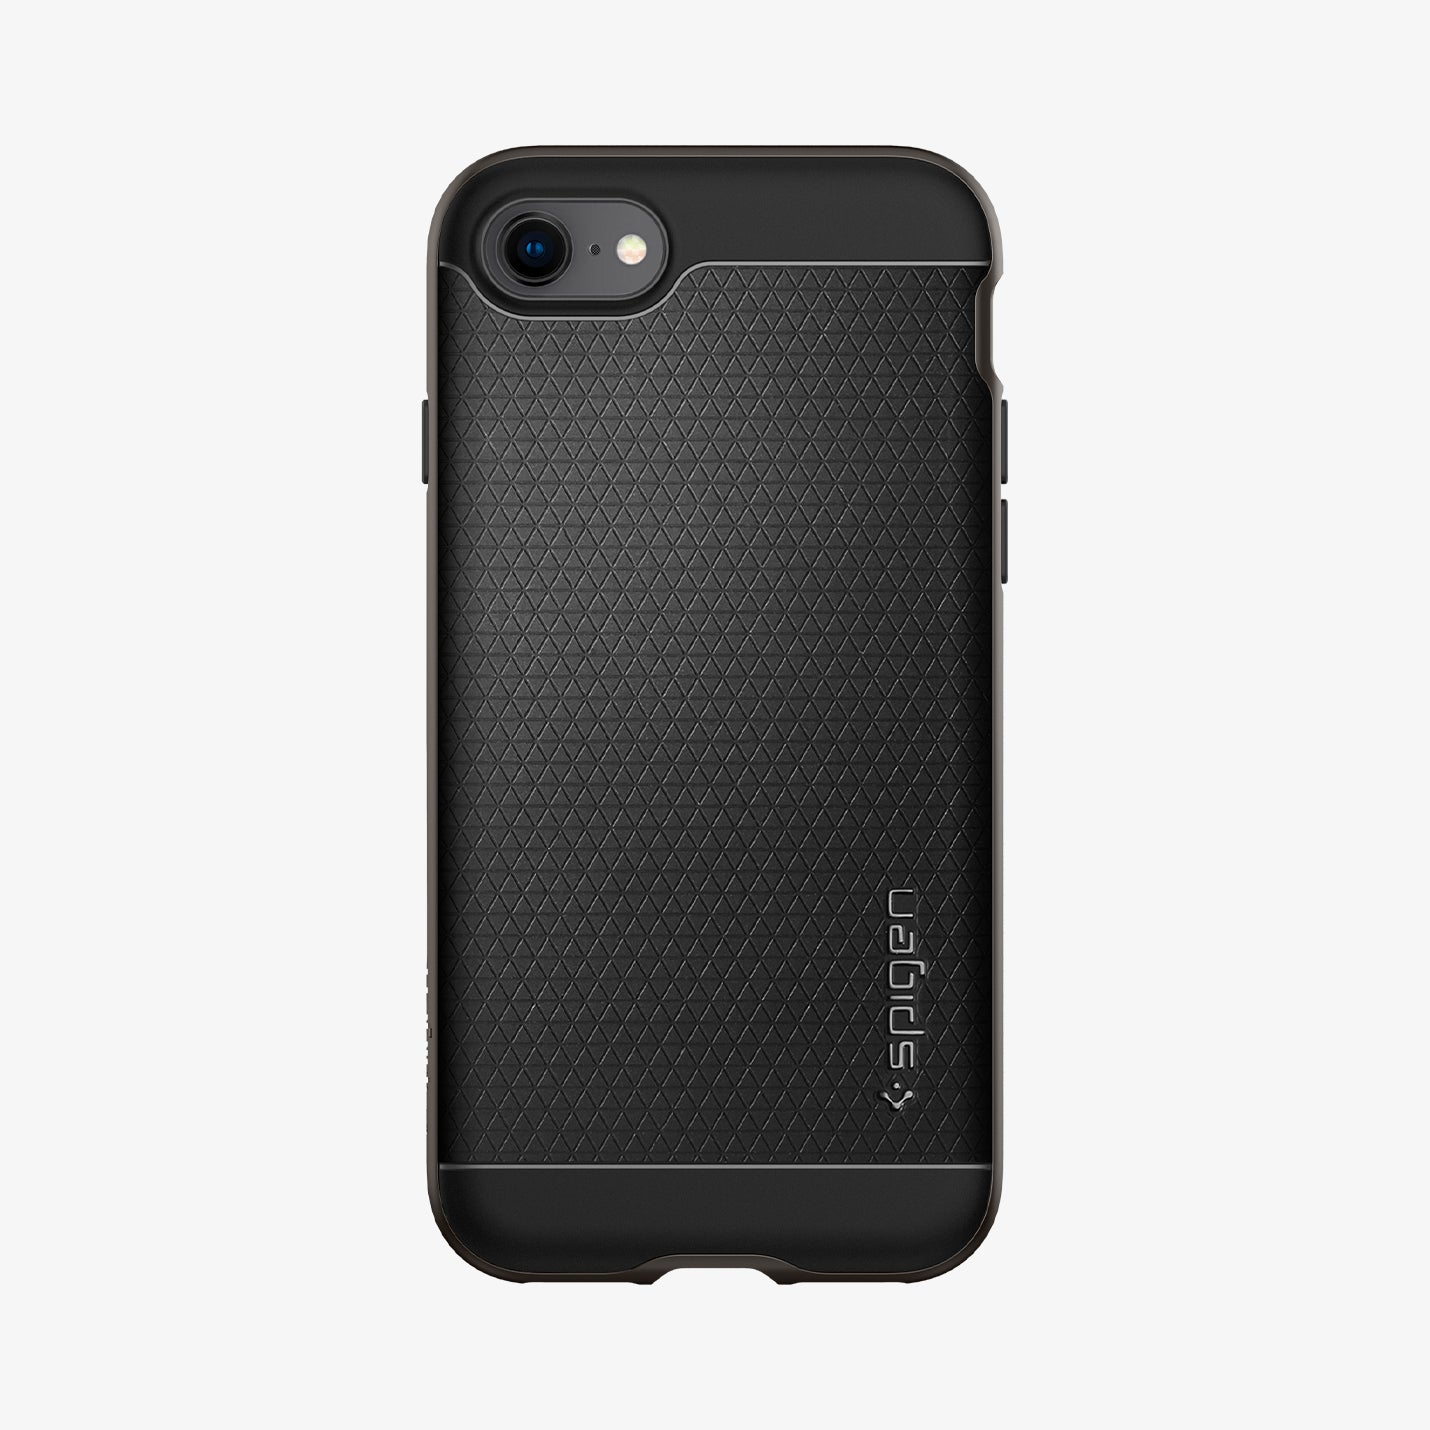 054CS22358 - iPhone SE Neo Hybrid case in gunmetal showing the back